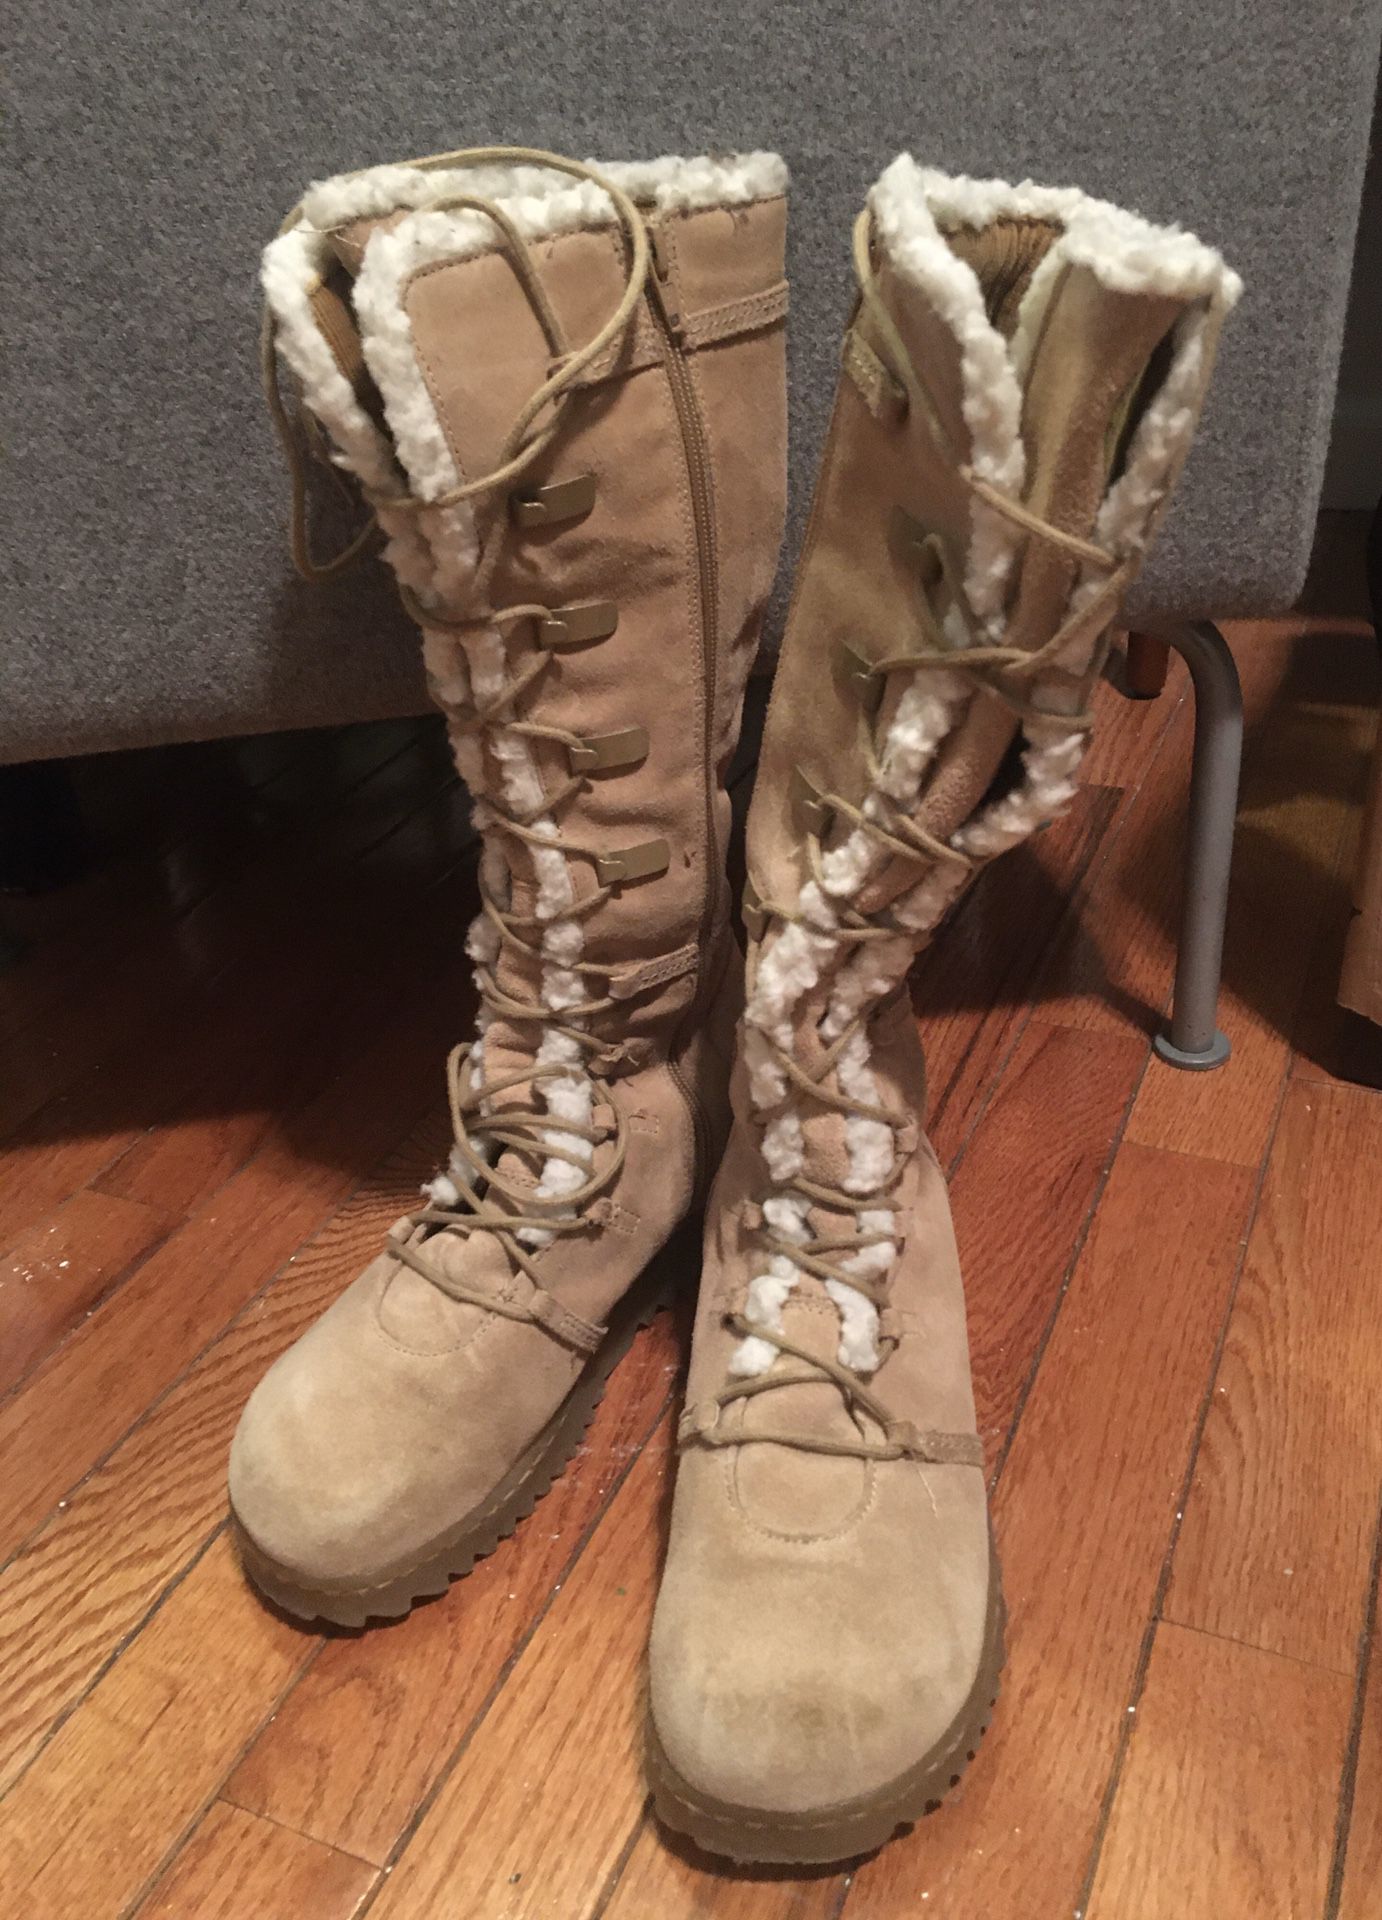 ALDO Women’s sz 7.5/8 (38) Winter Boots - Great Condition- Worn Once